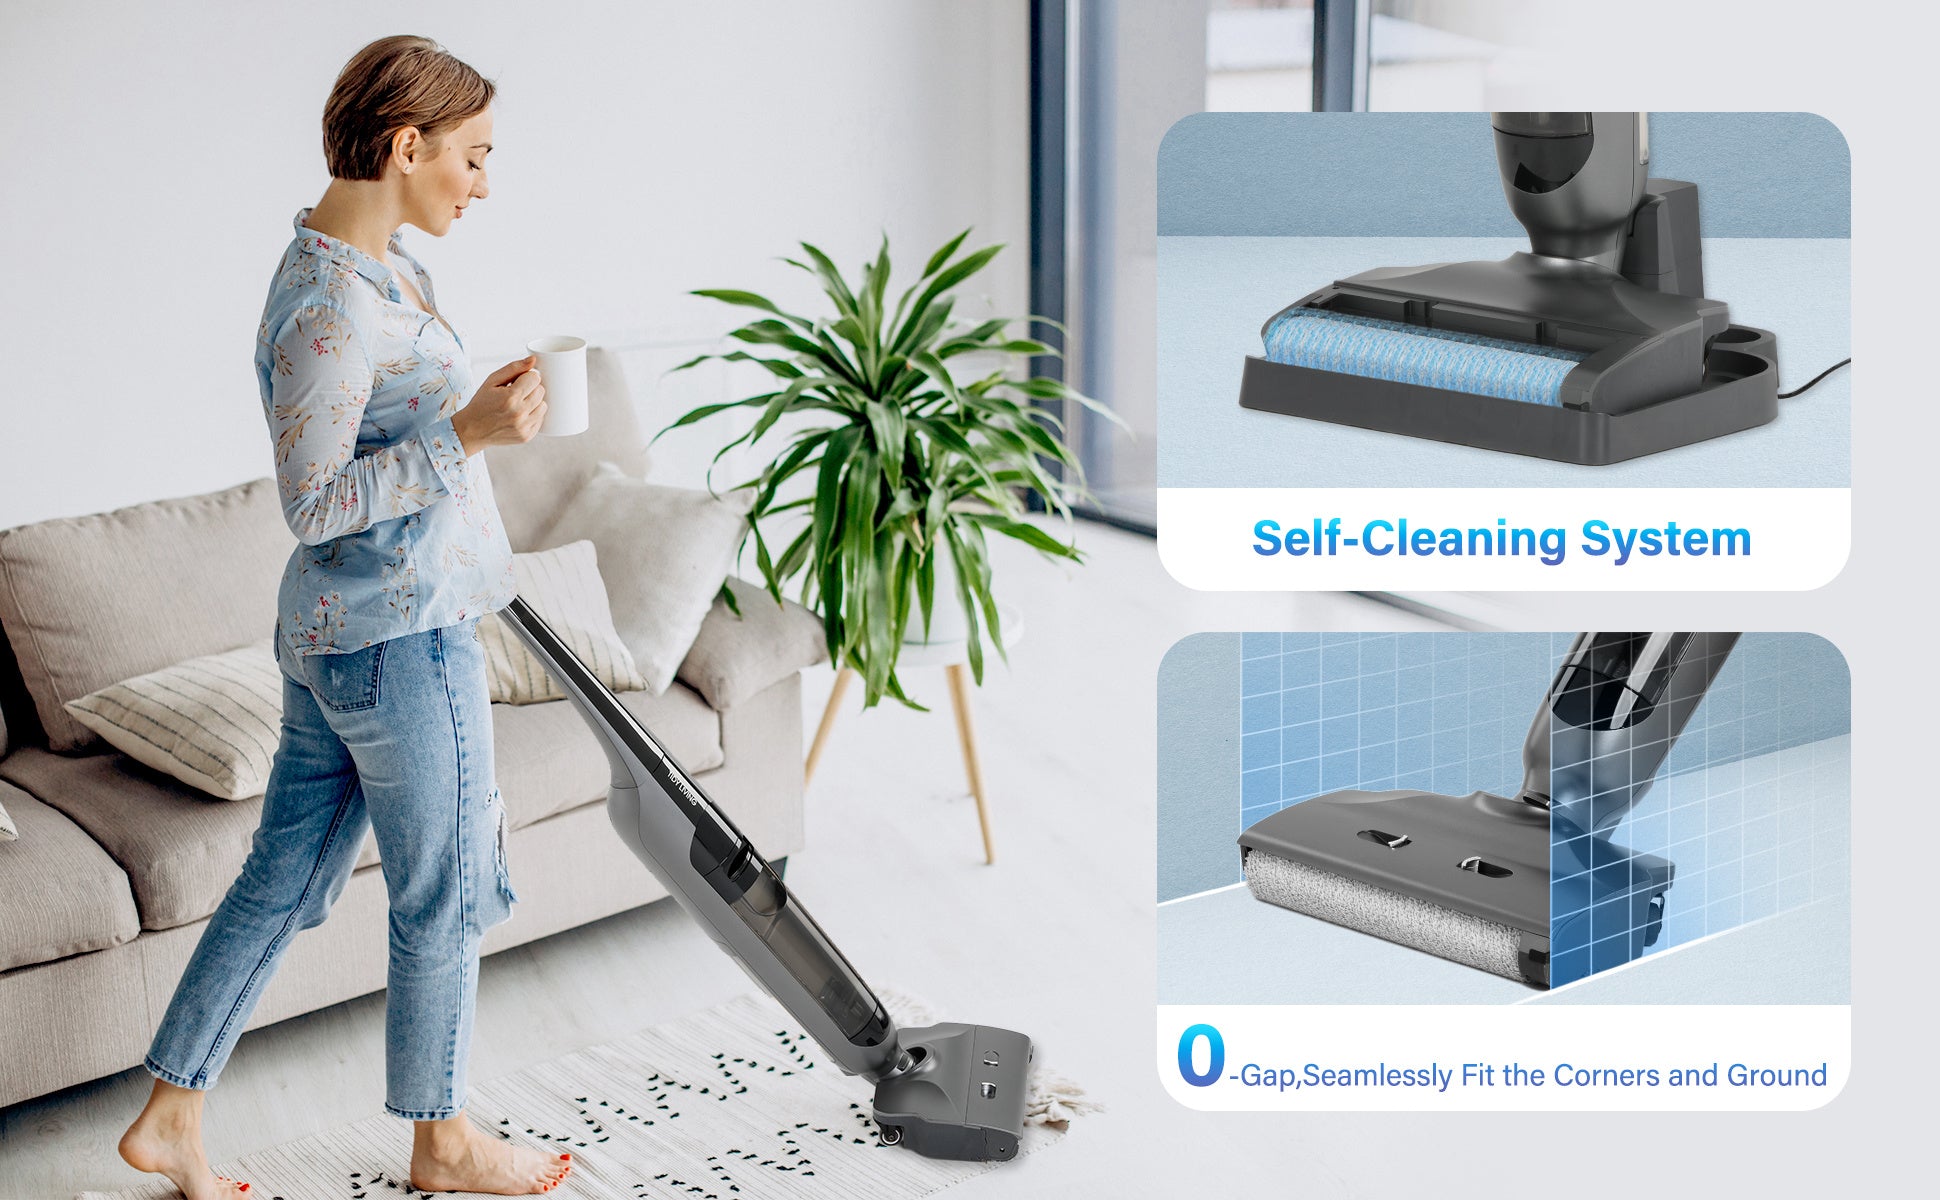 A Wet Dry Vacuum Cleaner for Home, Cordless Vacuum and Mop Combo with Self-Cleaning & Aromatherapy, 50Mins Long Runtime, Stick Vacuum Cleaner for Pet Hair Hardwood Floor Carpet with other items.